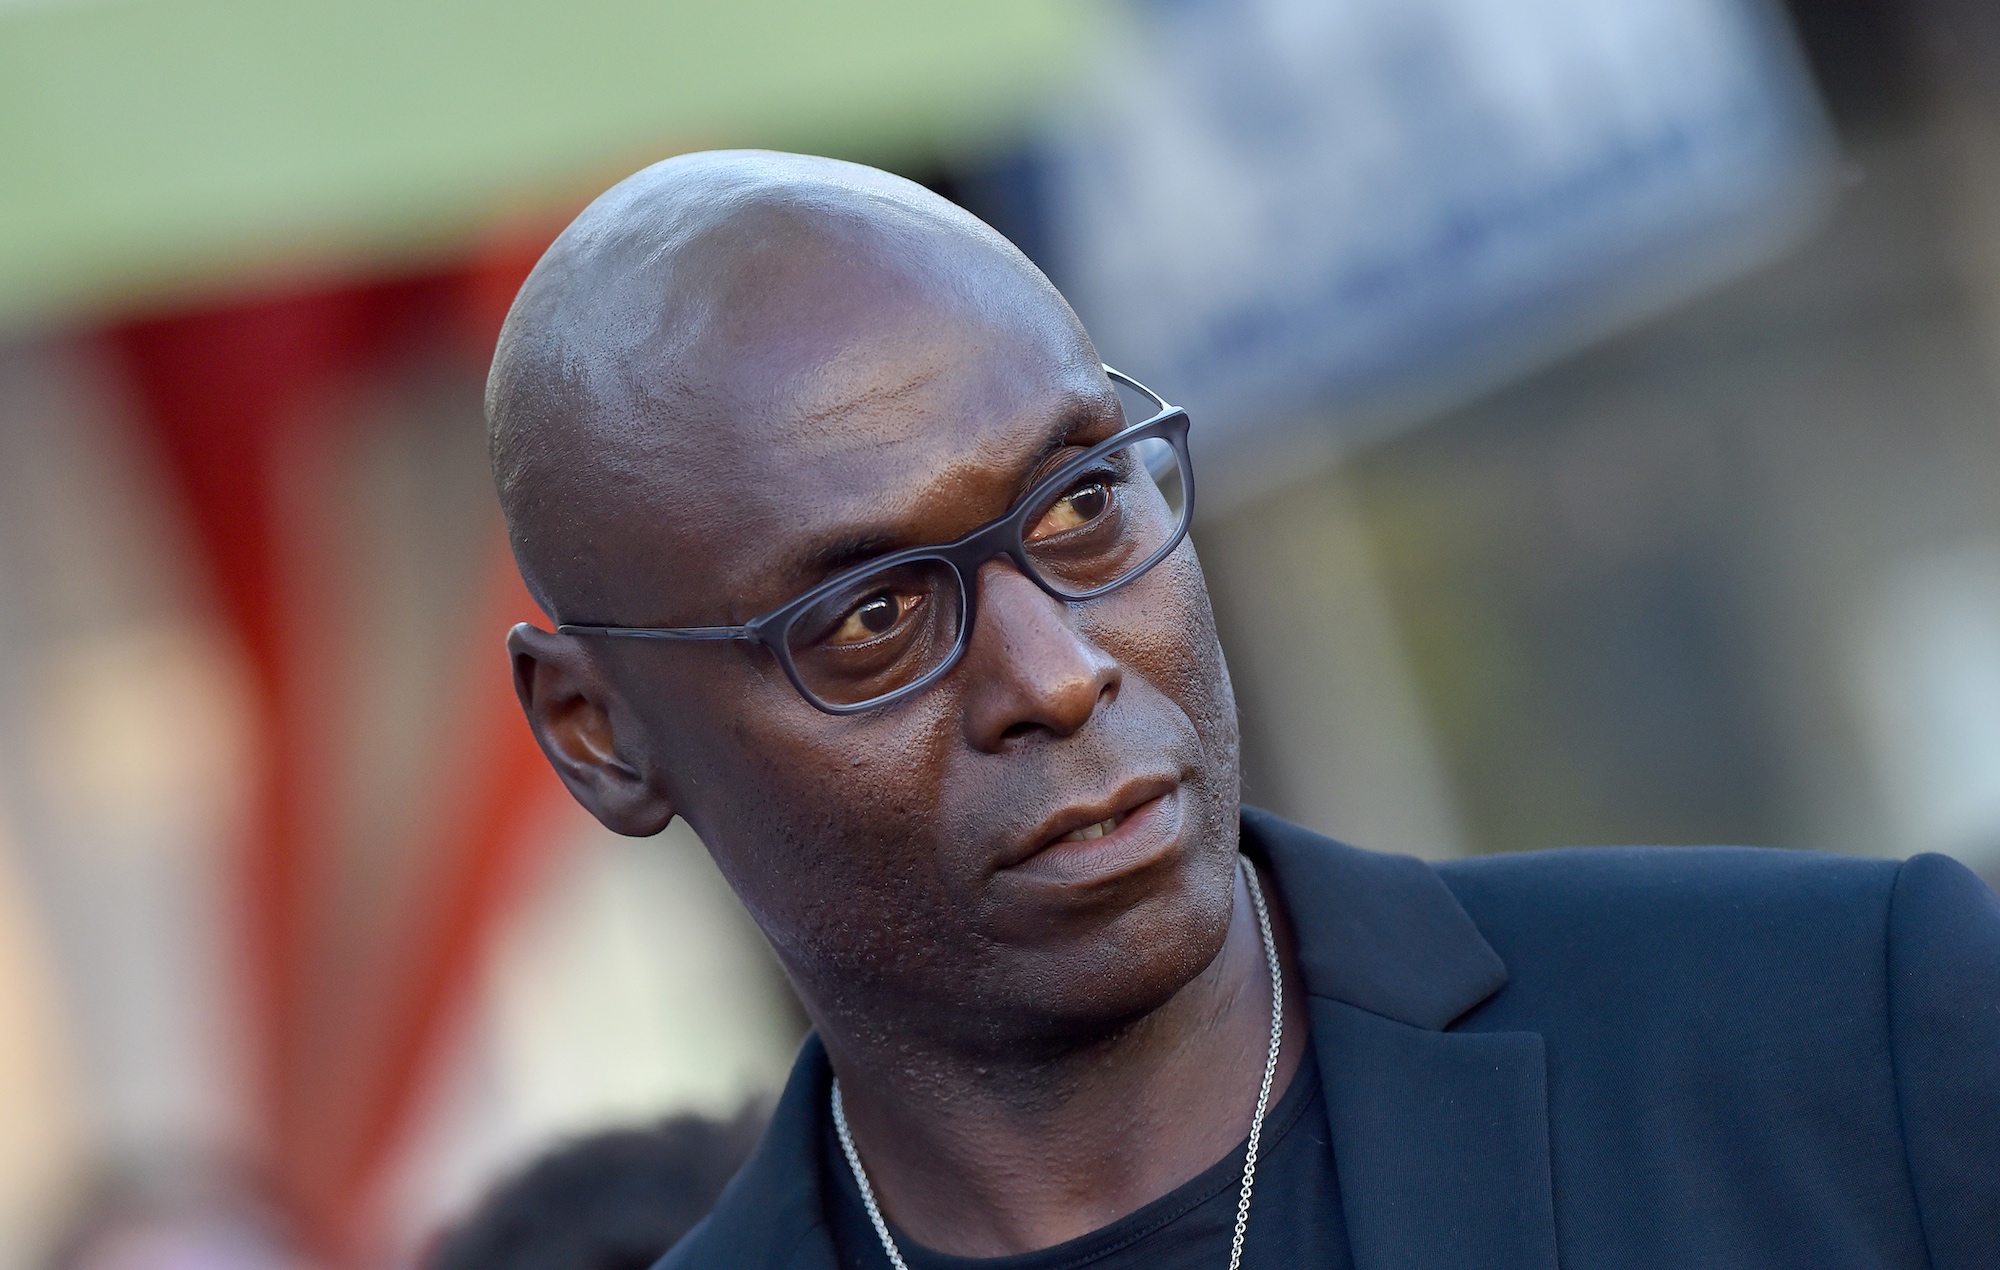 ‘Destiny 2’ players are paying their respects to Lance Reddick in-game